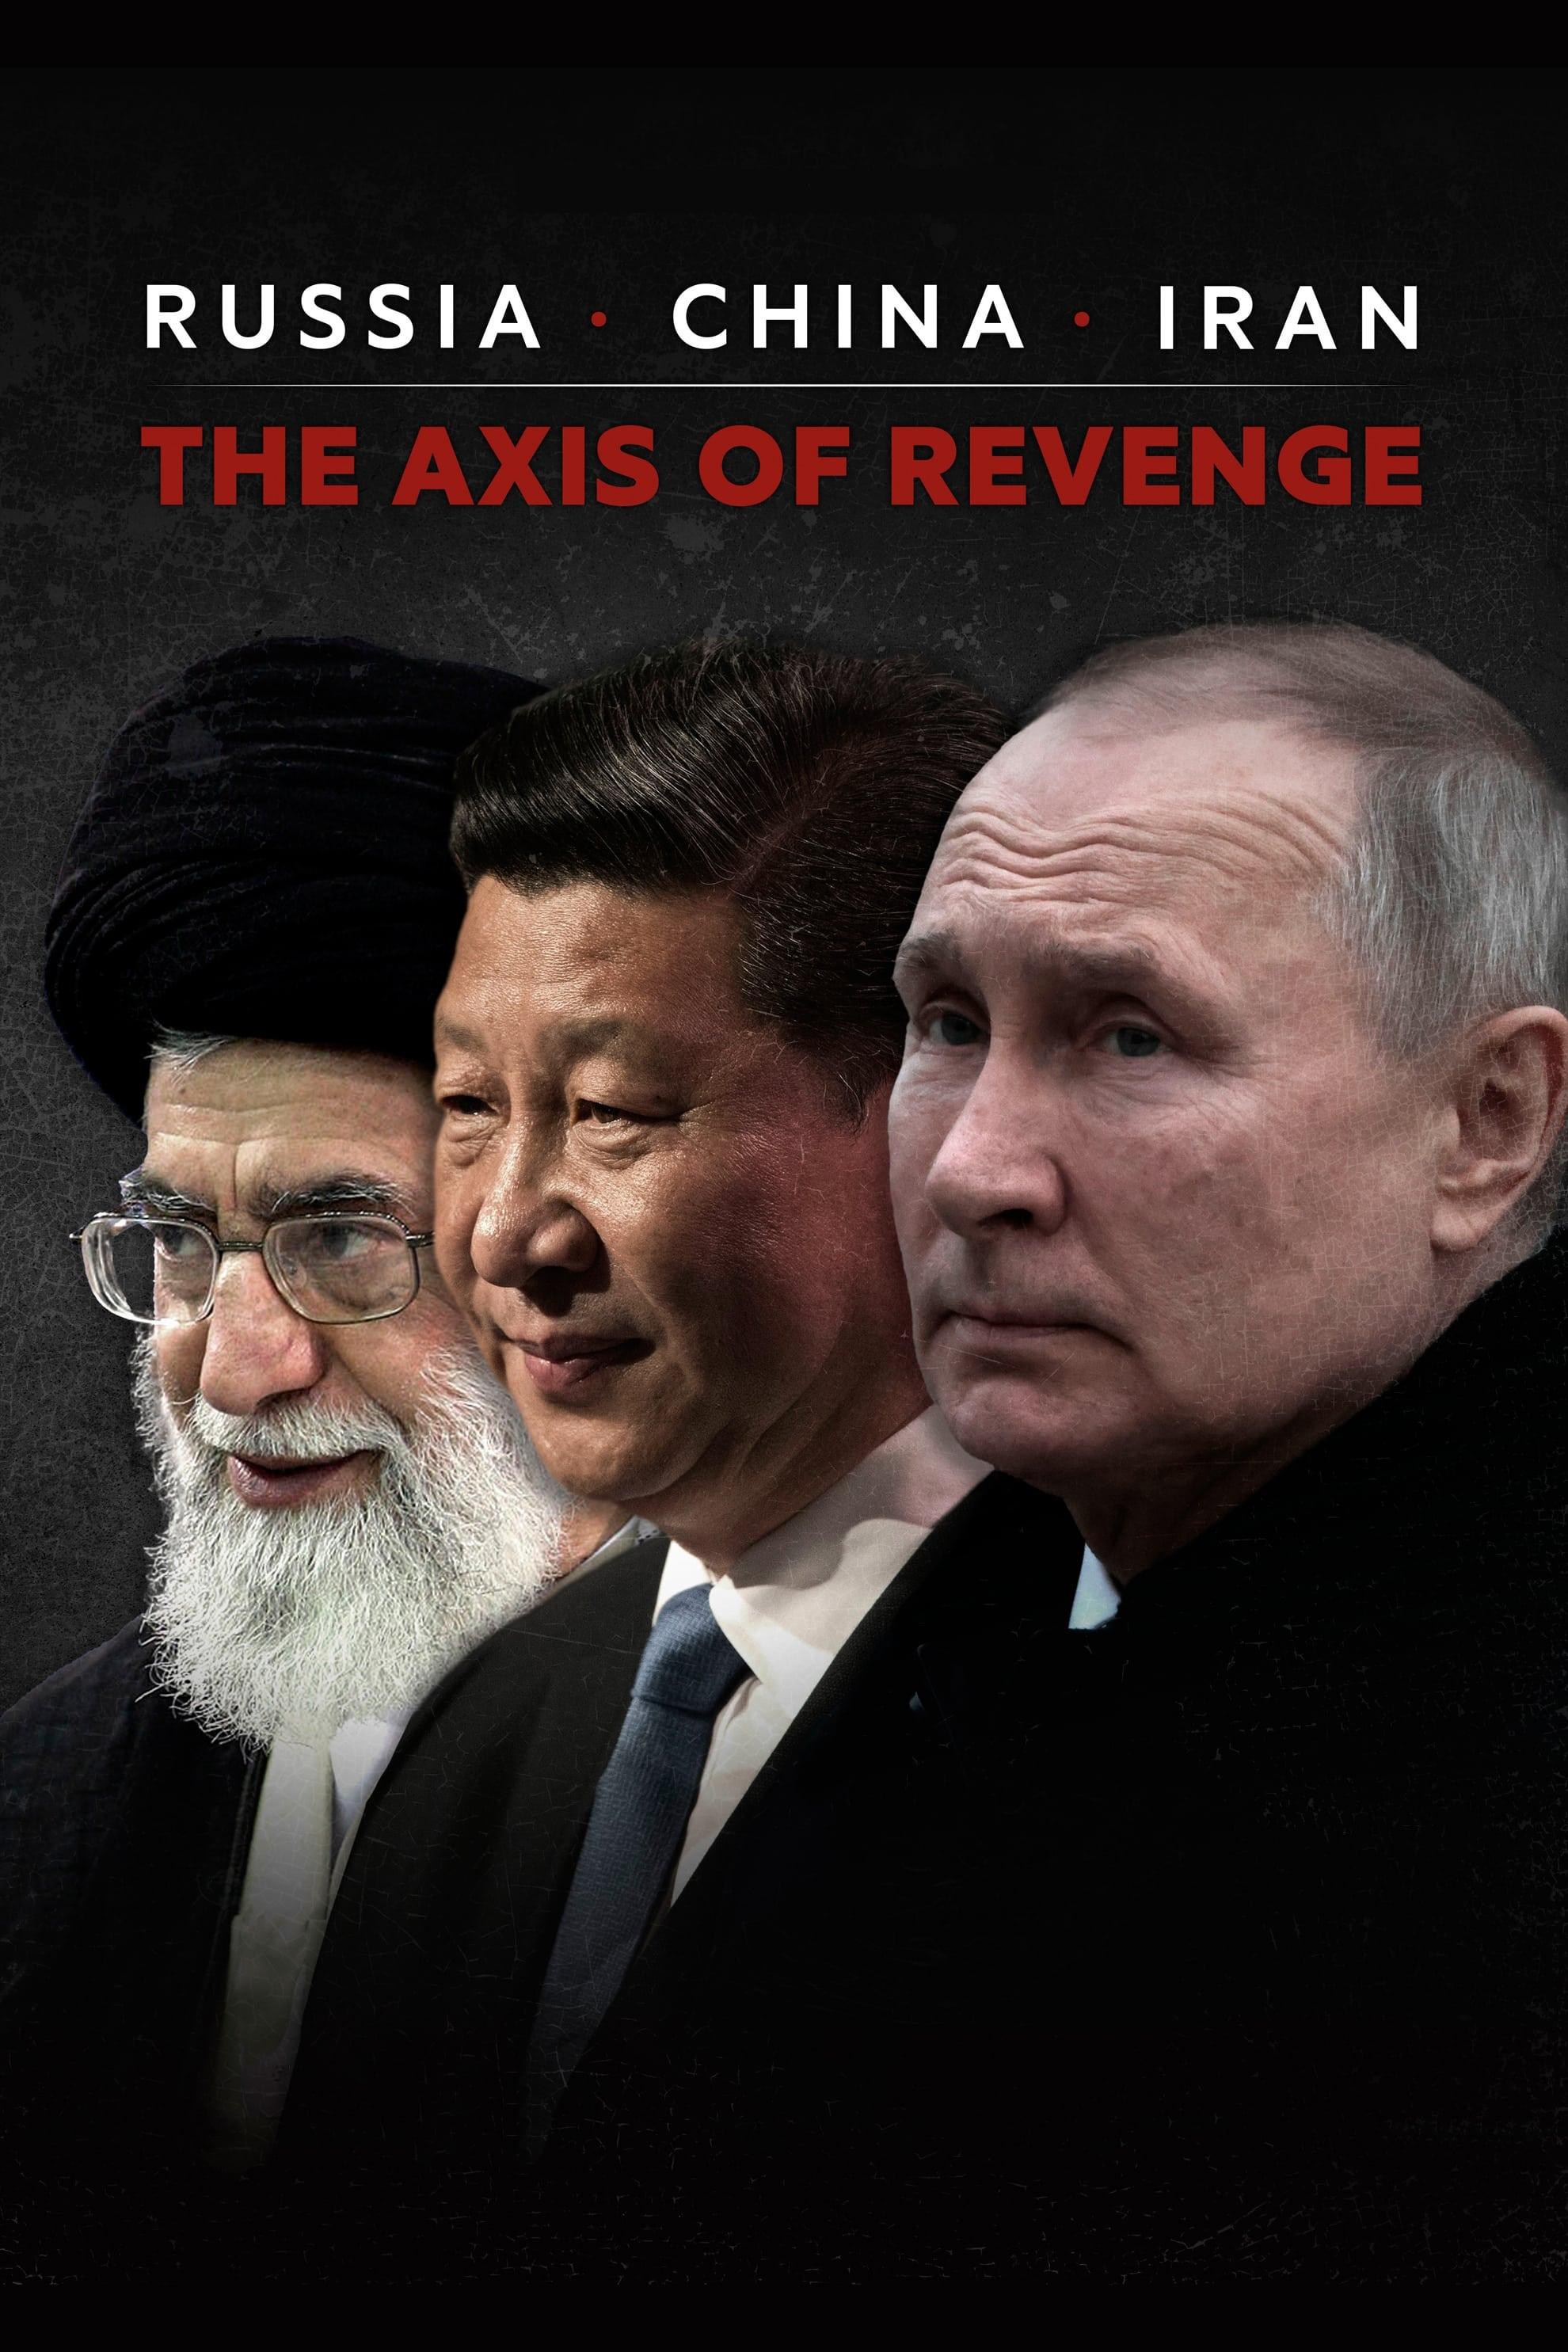 Russia, China, Iran: The Axis of Revenge poster